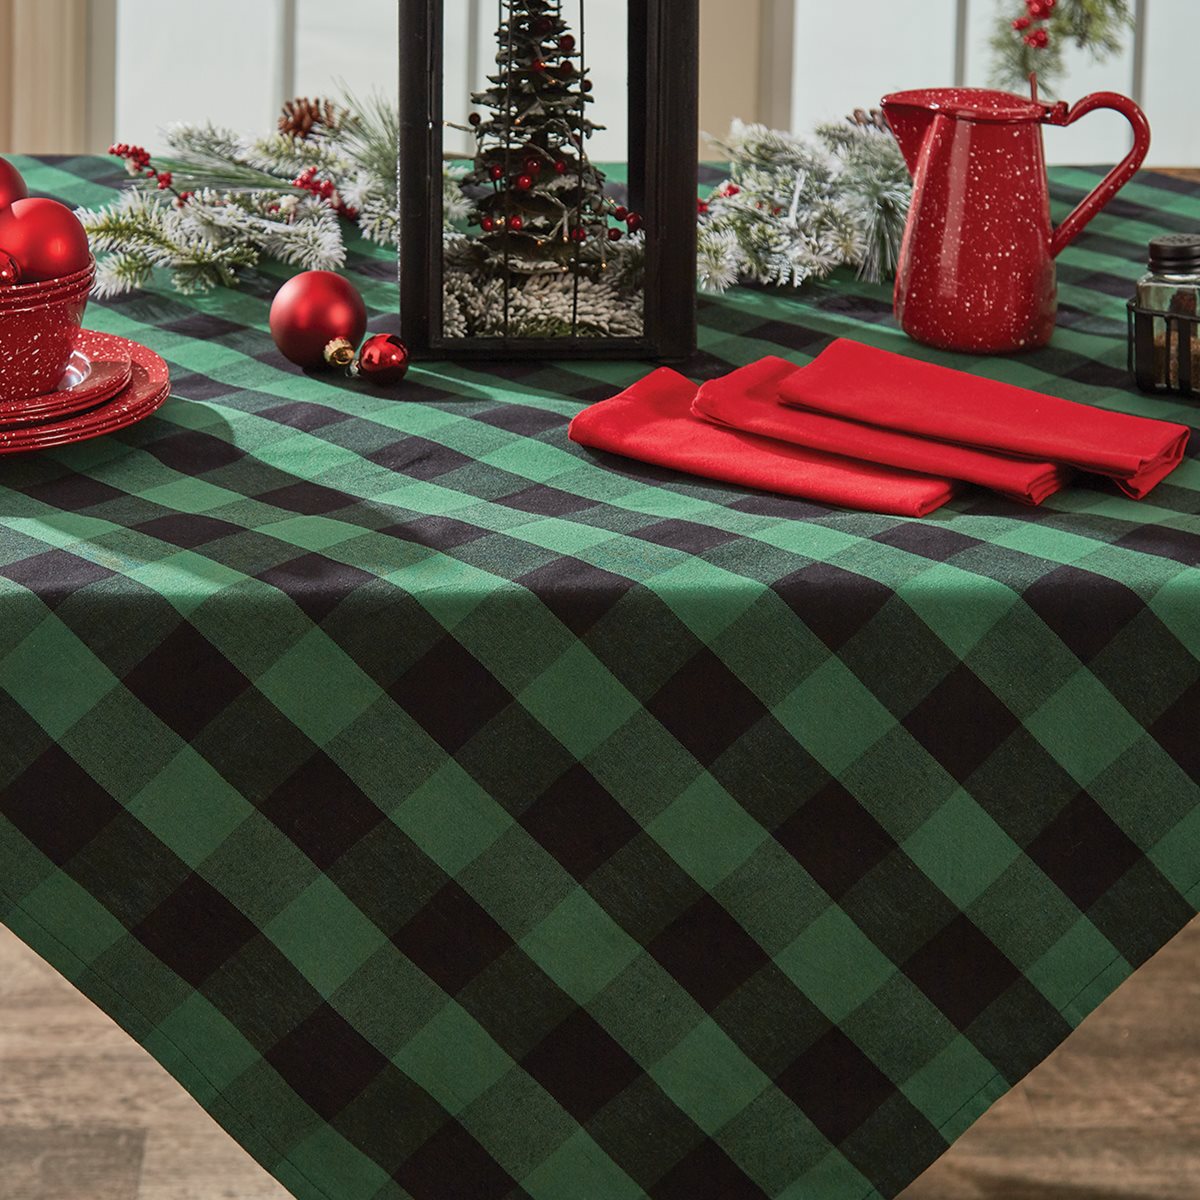 Wicklow Check Tablecloth 54X54 Forest